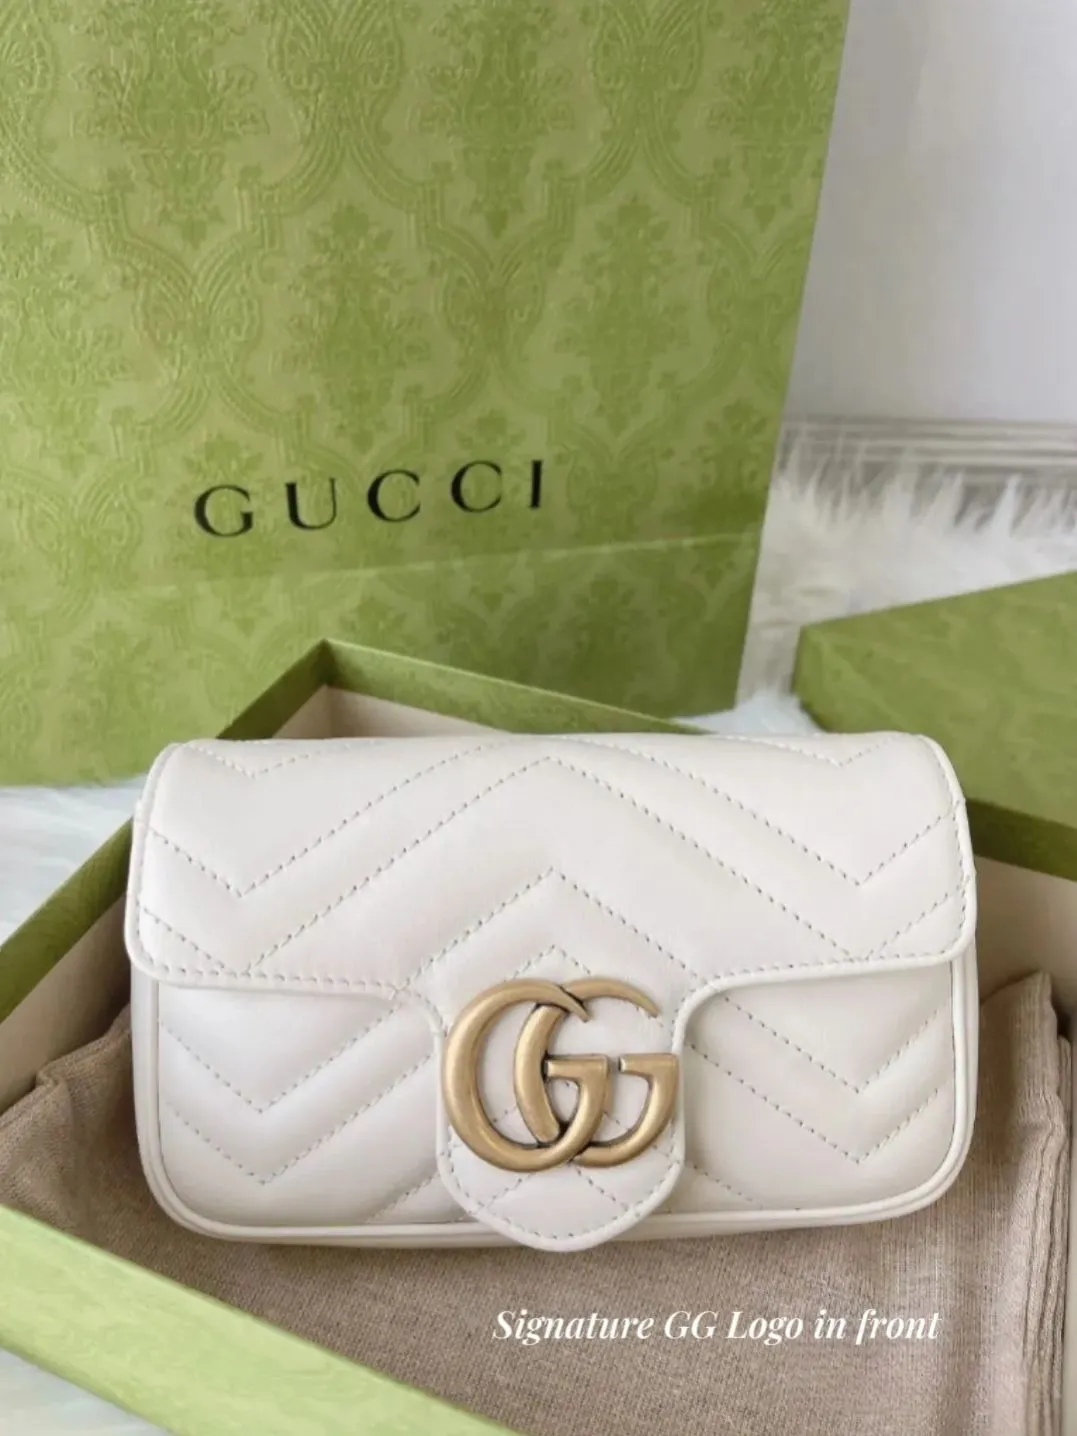 Gucci Marmont Mini Bag Review, Gallery posted by Maxxy Hayes